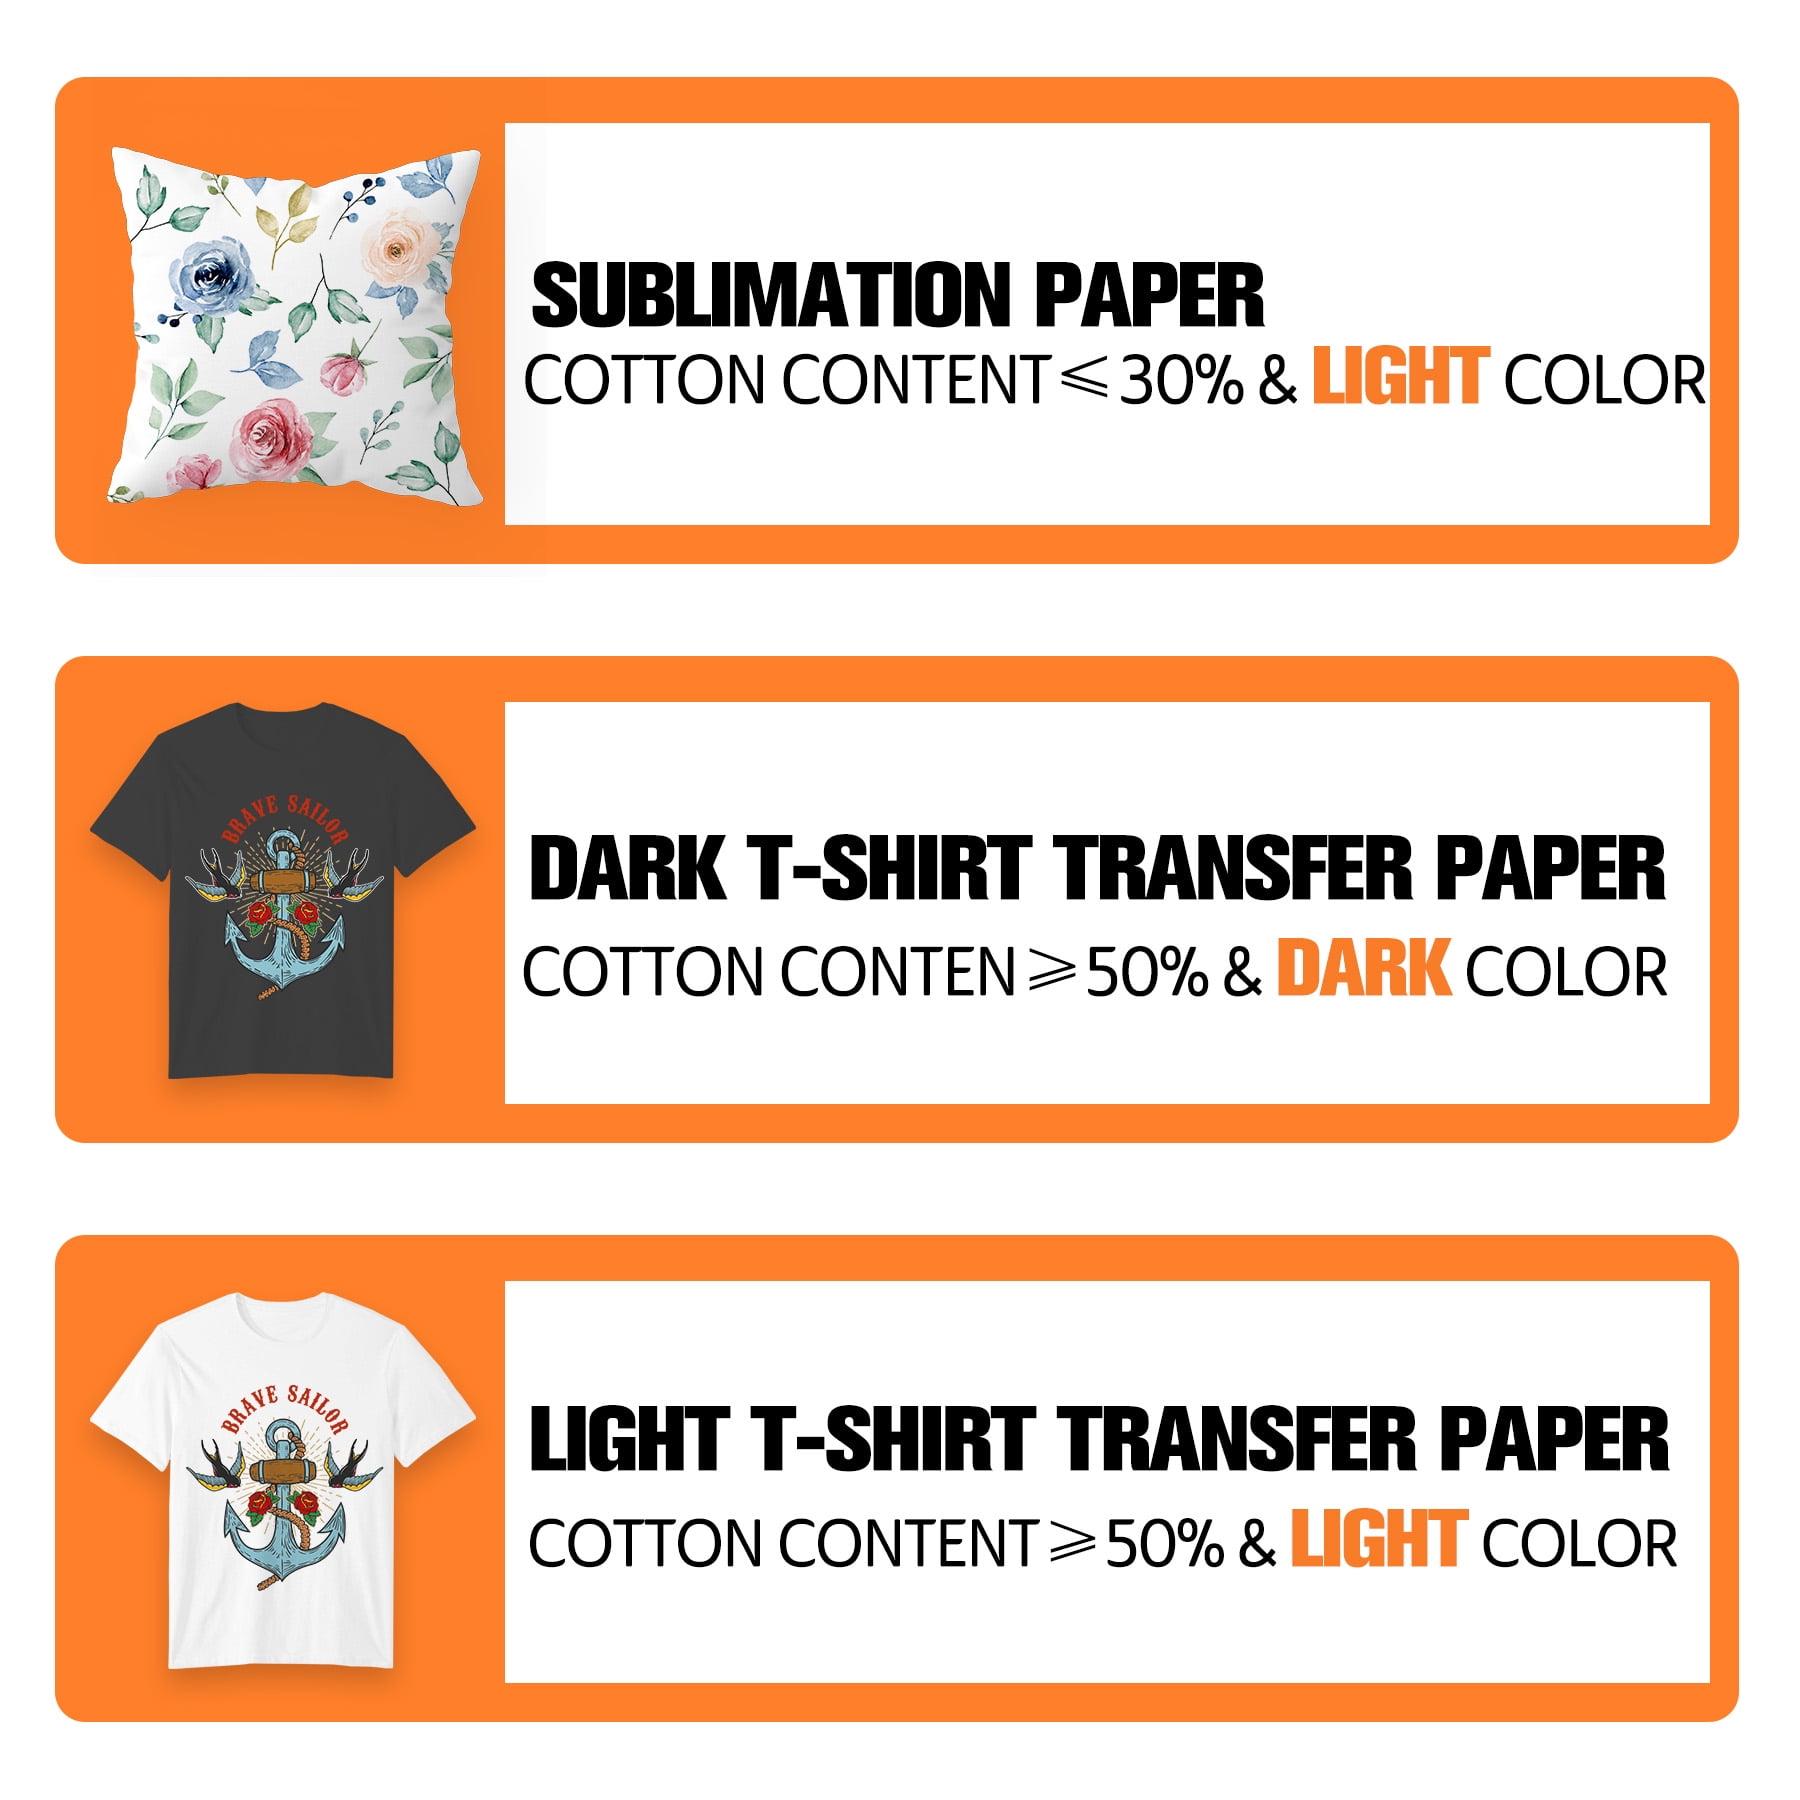 A-SUB丨No.1 sublimation paper in North American (@asub_paper